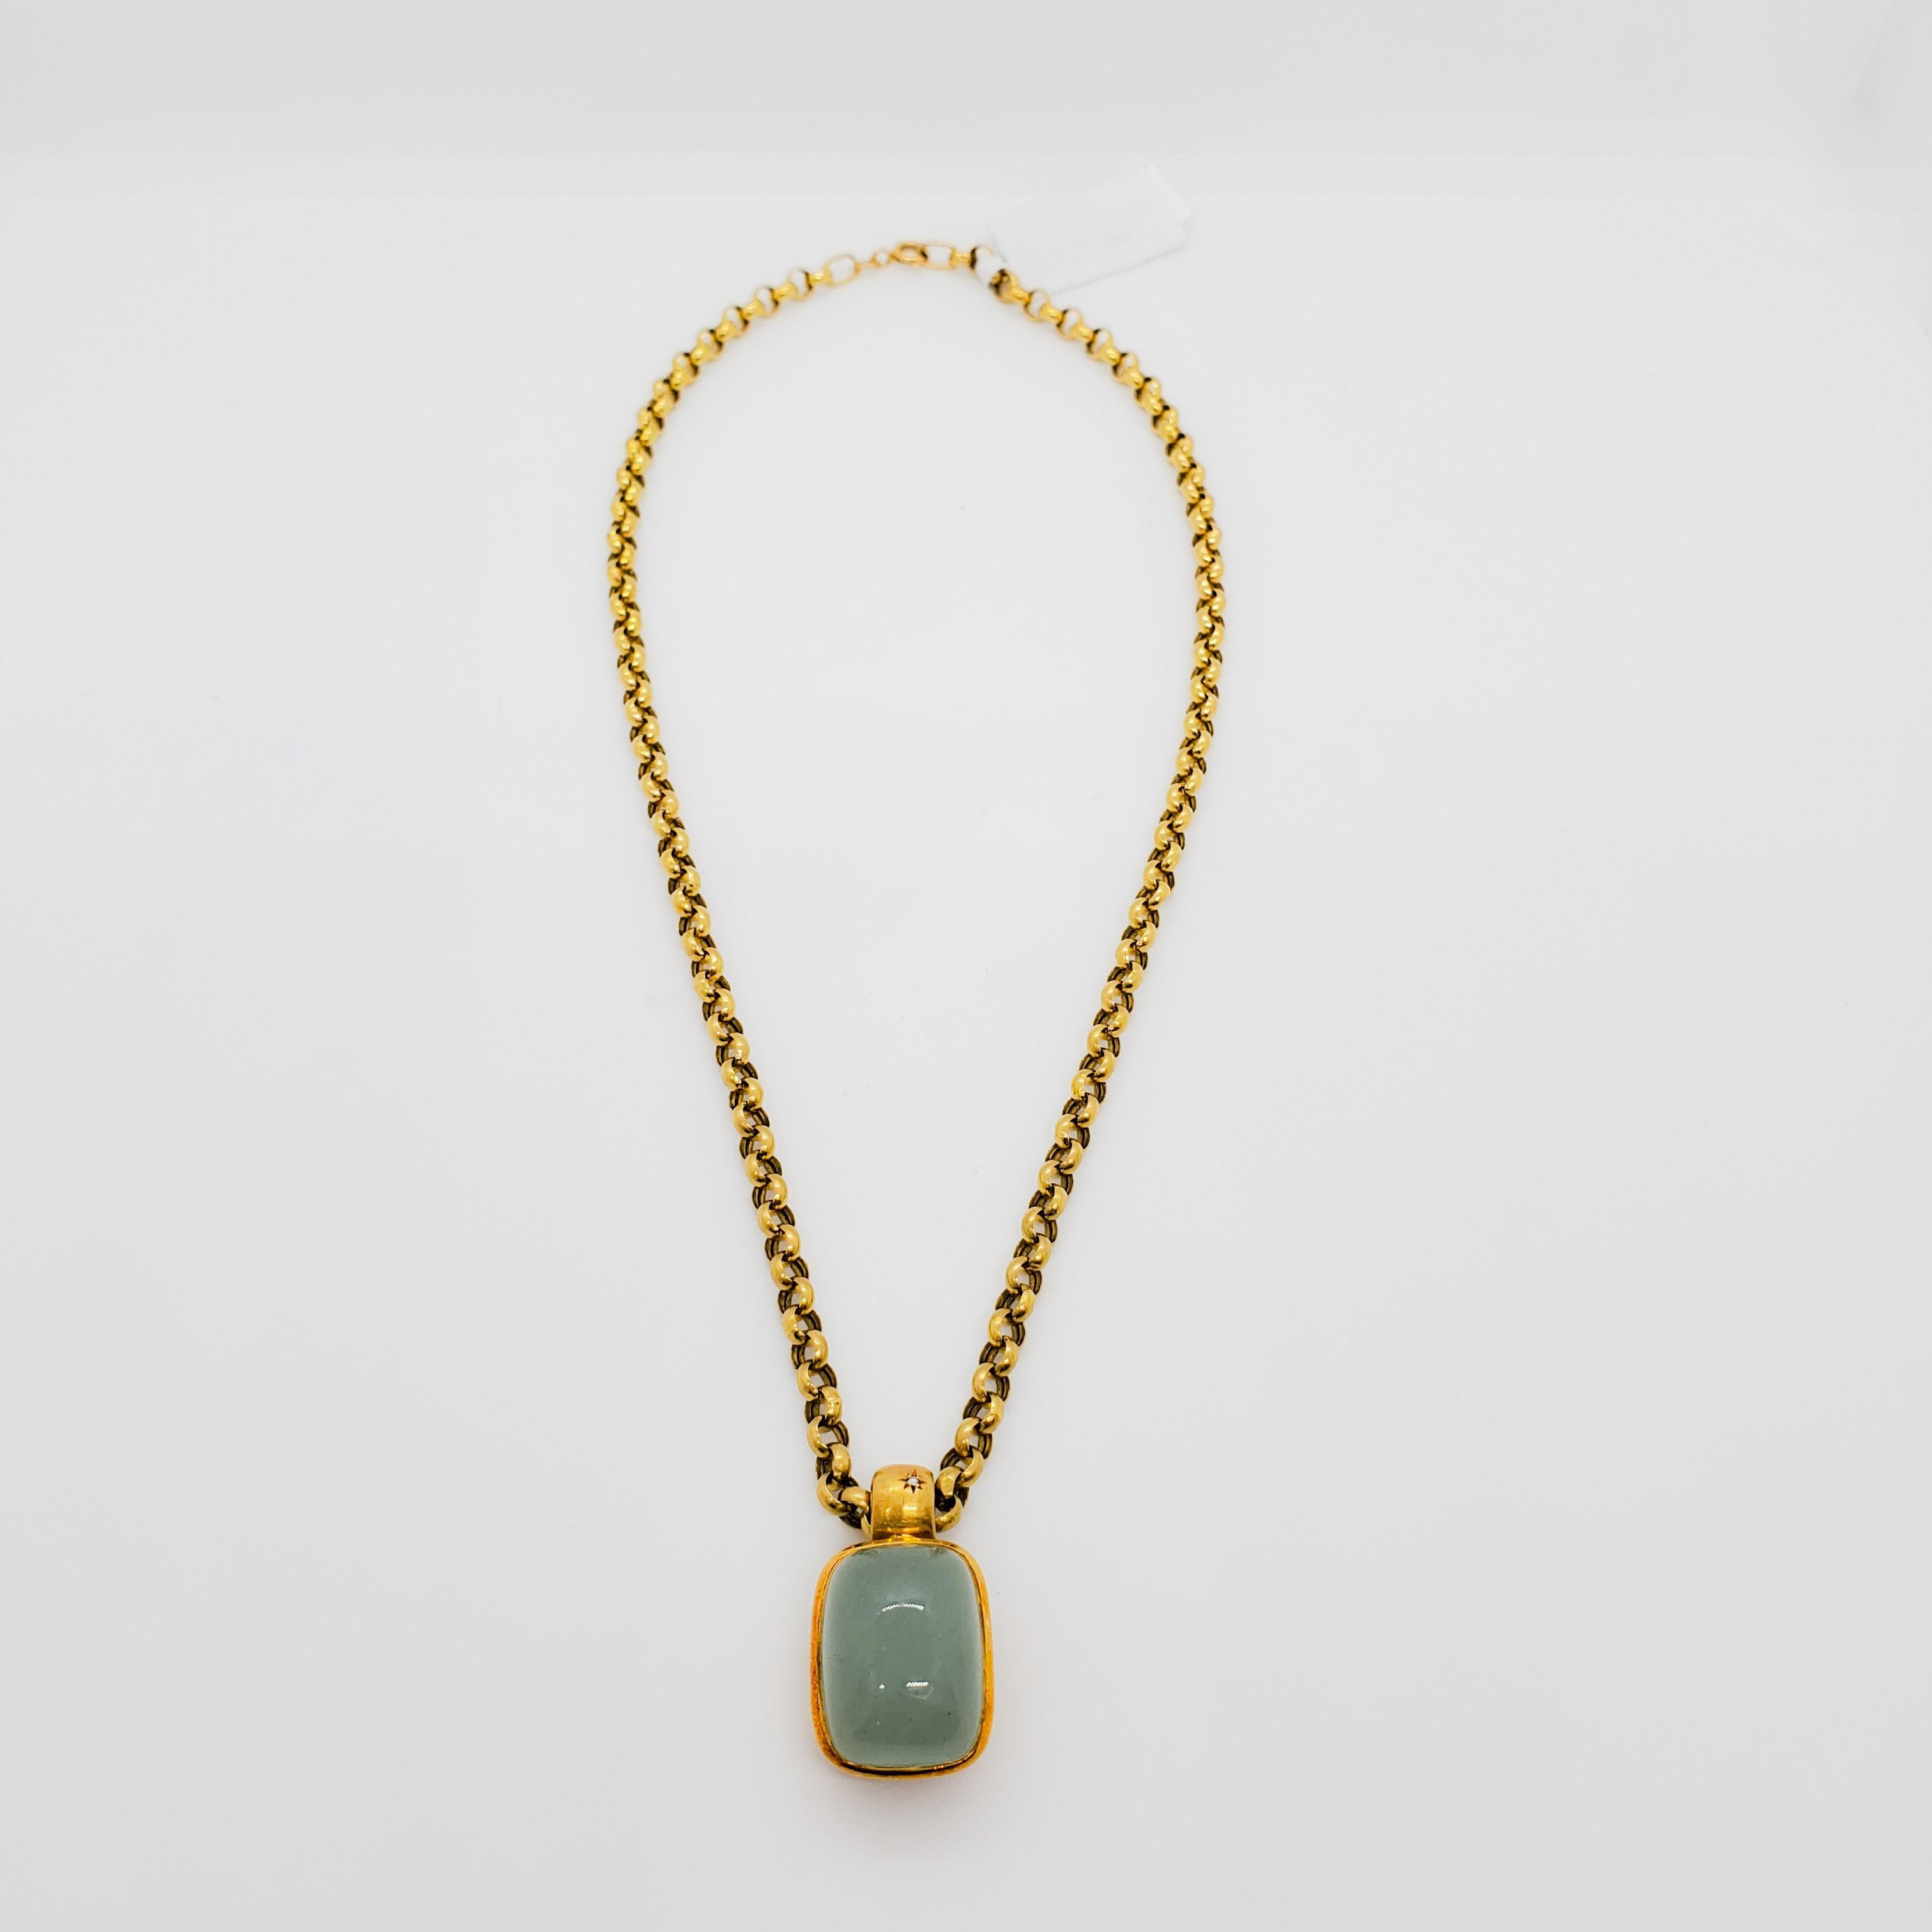 H. Stern Light Green Stone Pendant Necklace in 18k Yellow Gold 1